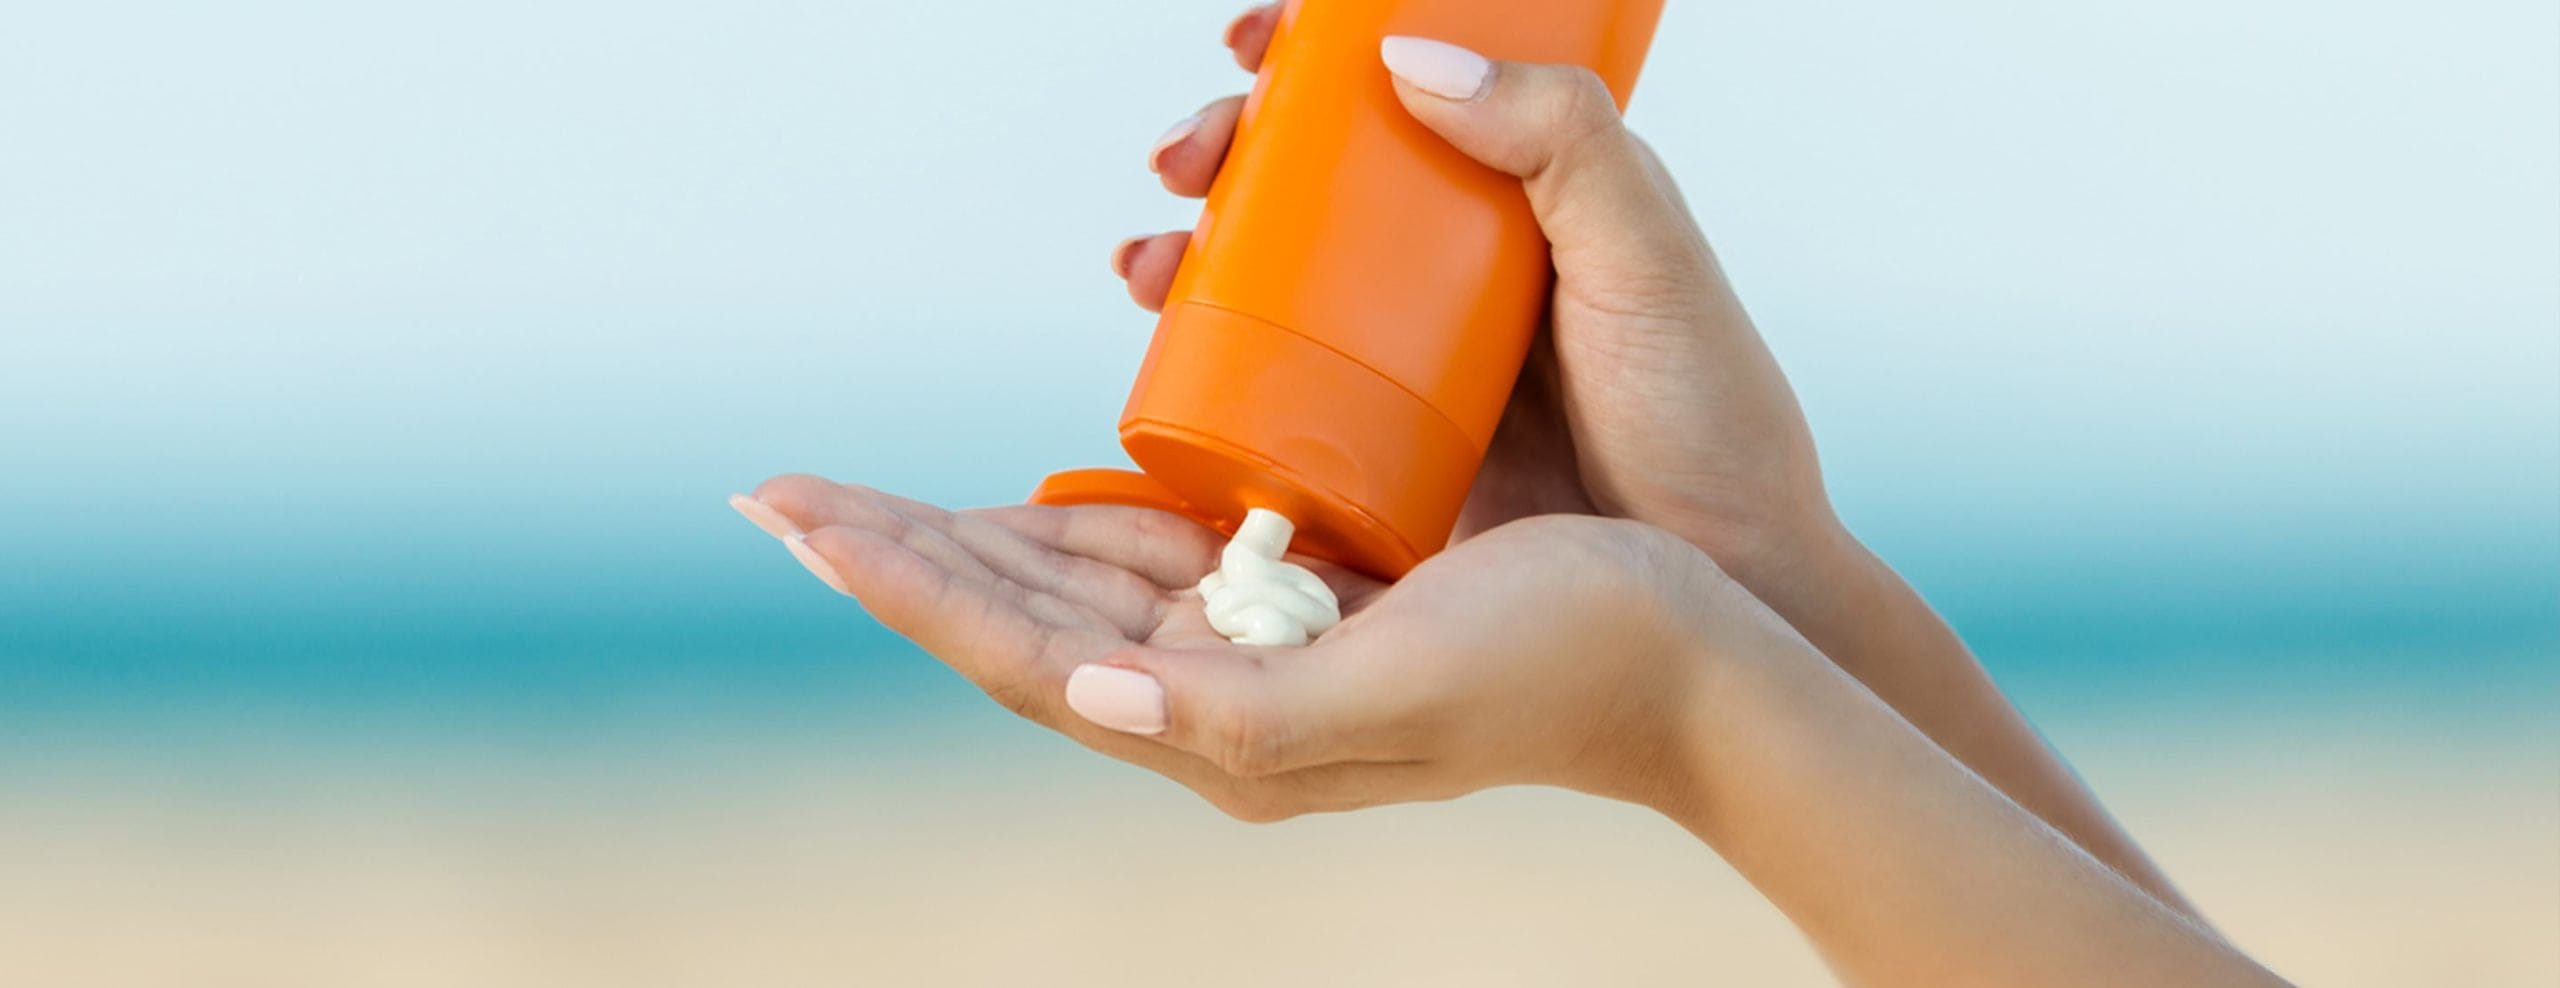 What sunscreens contain benzene?